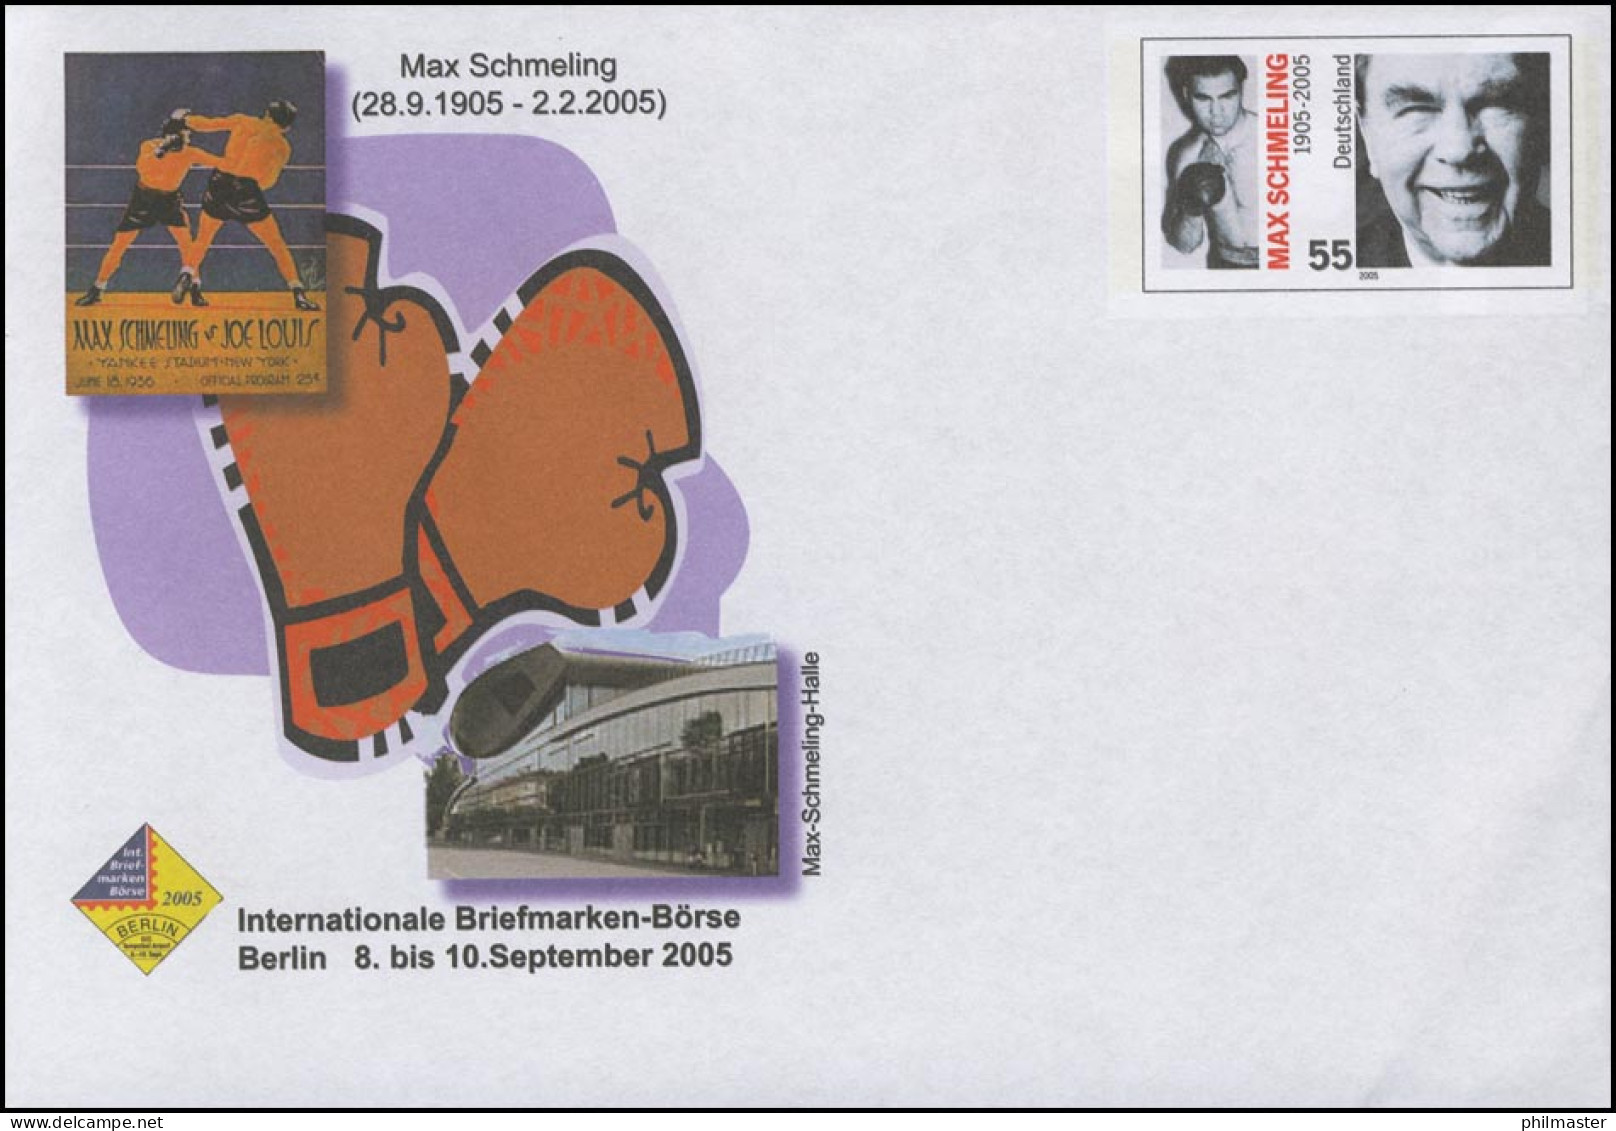 USo 102 Messe Berlin - Max Schmeling 2005, ** - Covers - Mint